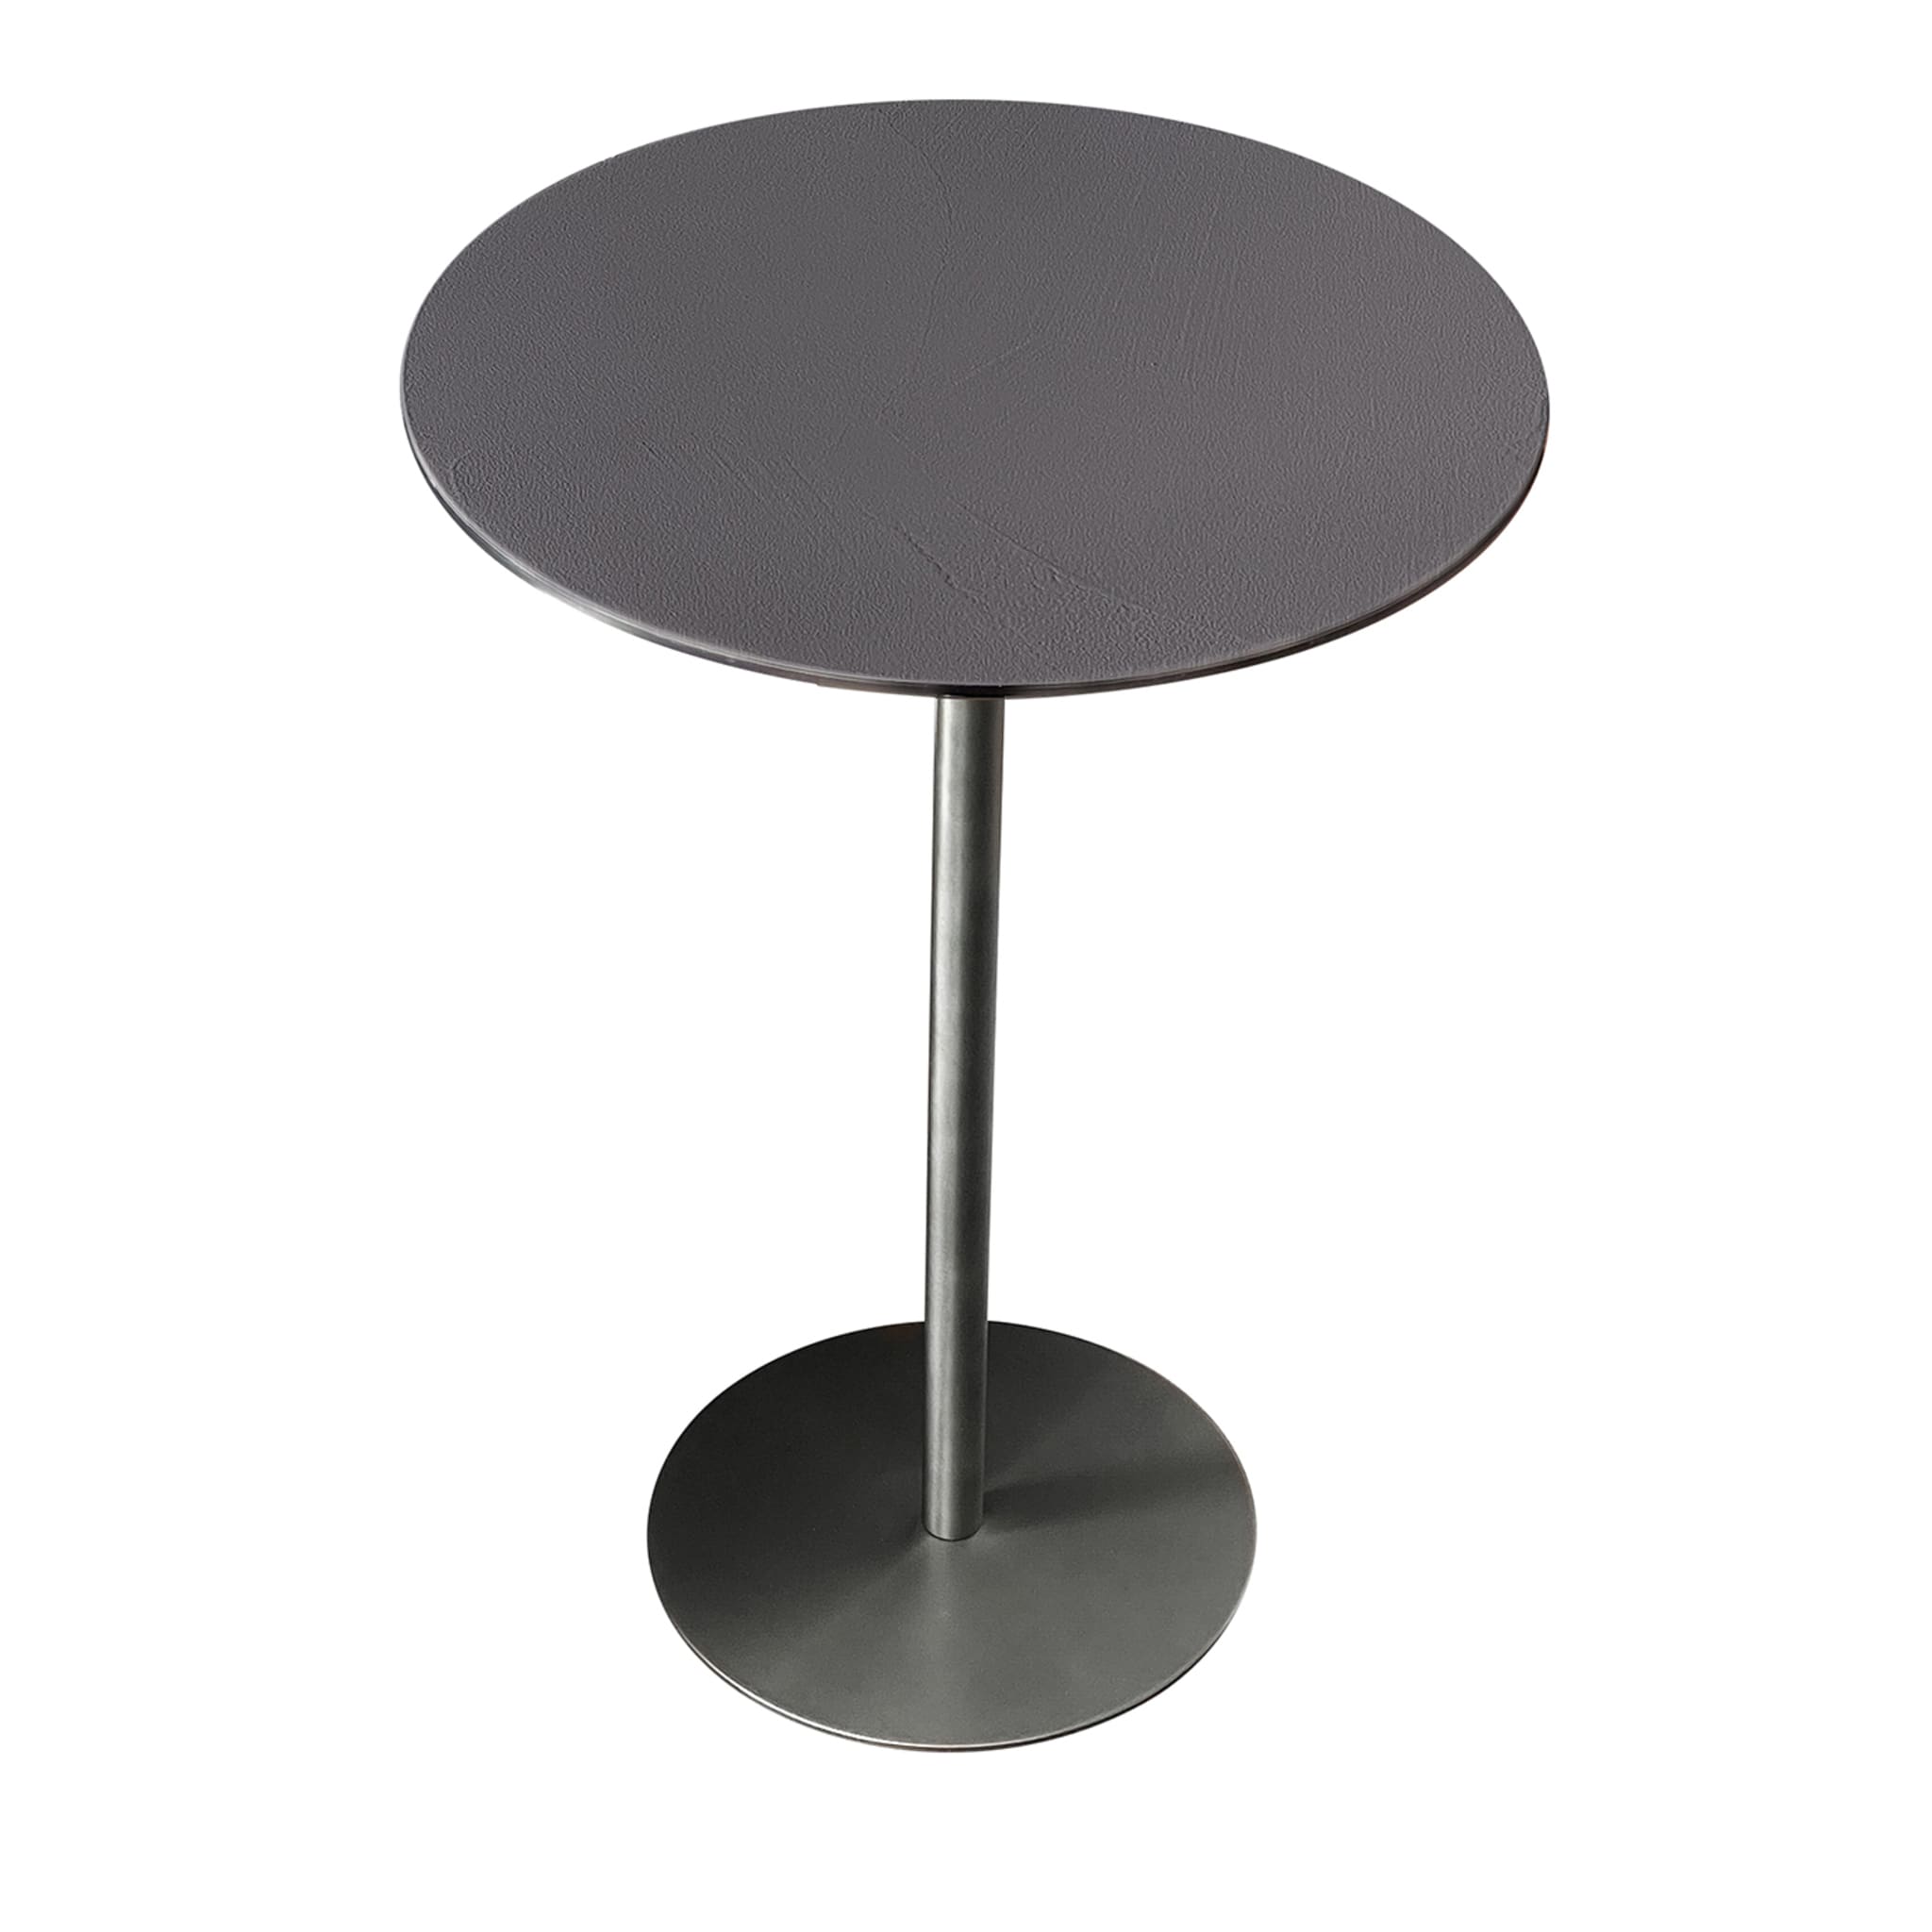 Ester Pece Stainless Steel Table - Main view